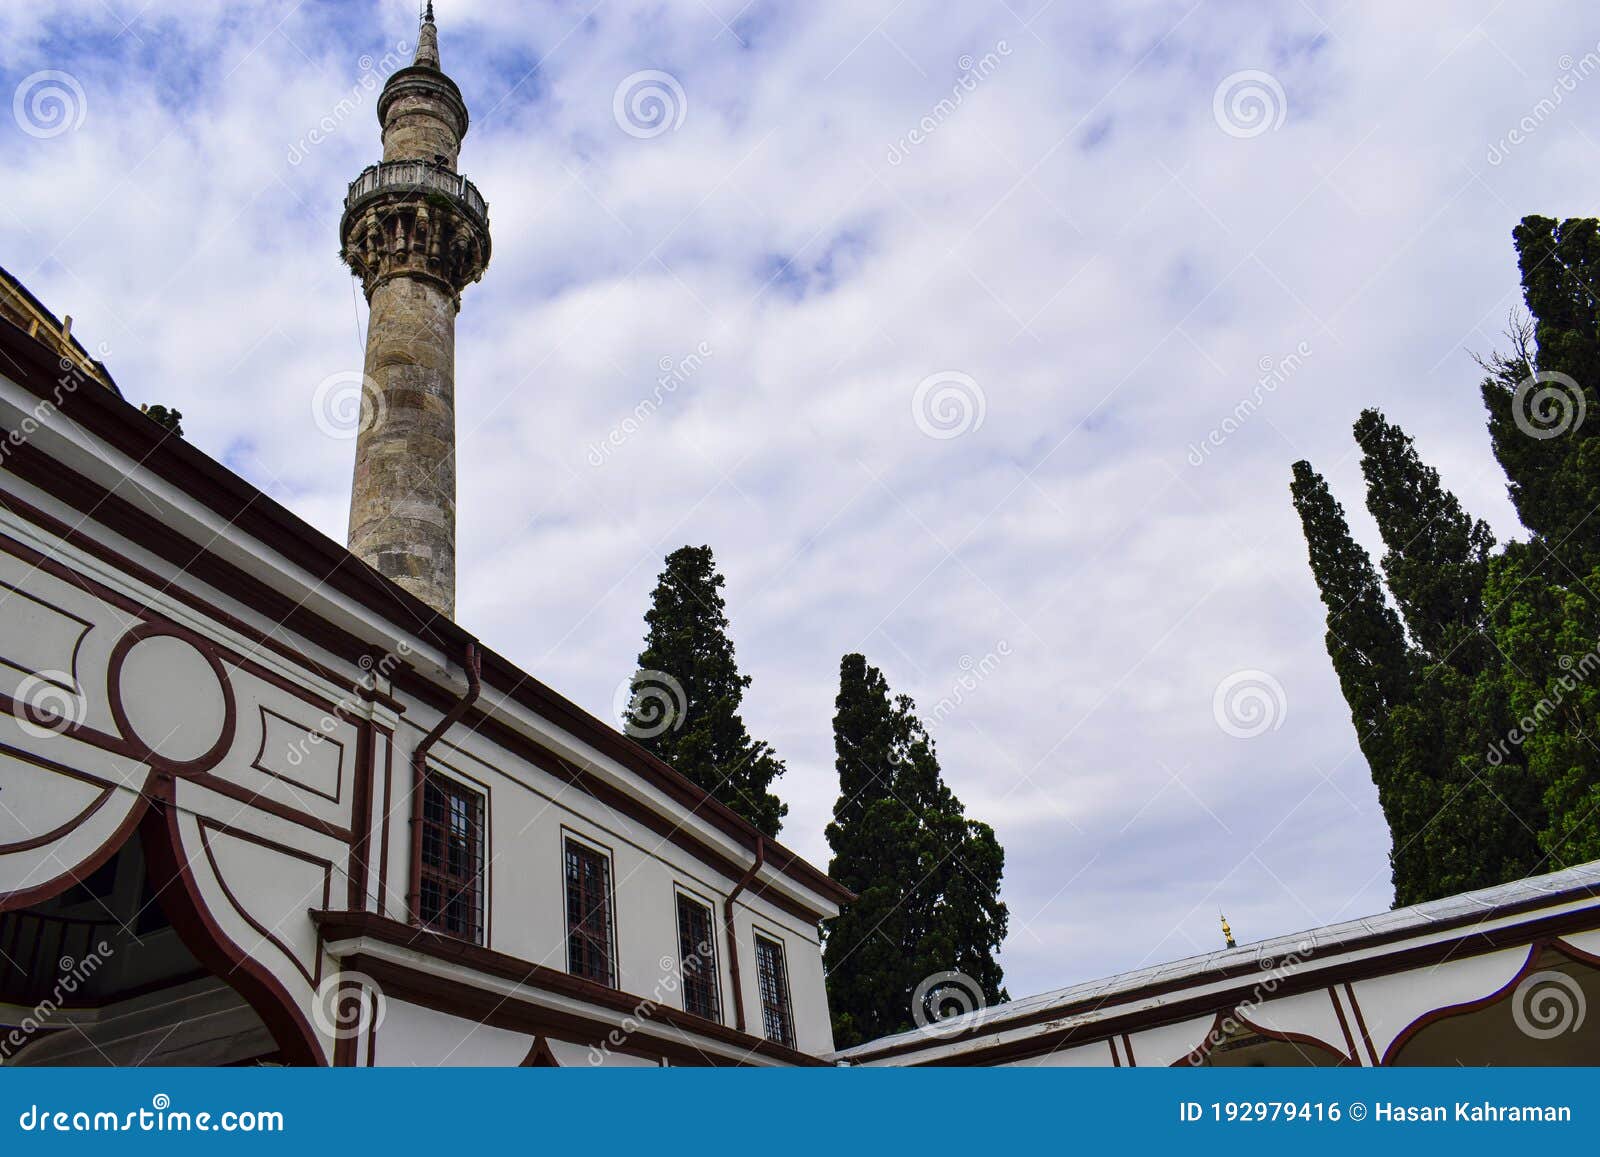 minaret of the historical mosque